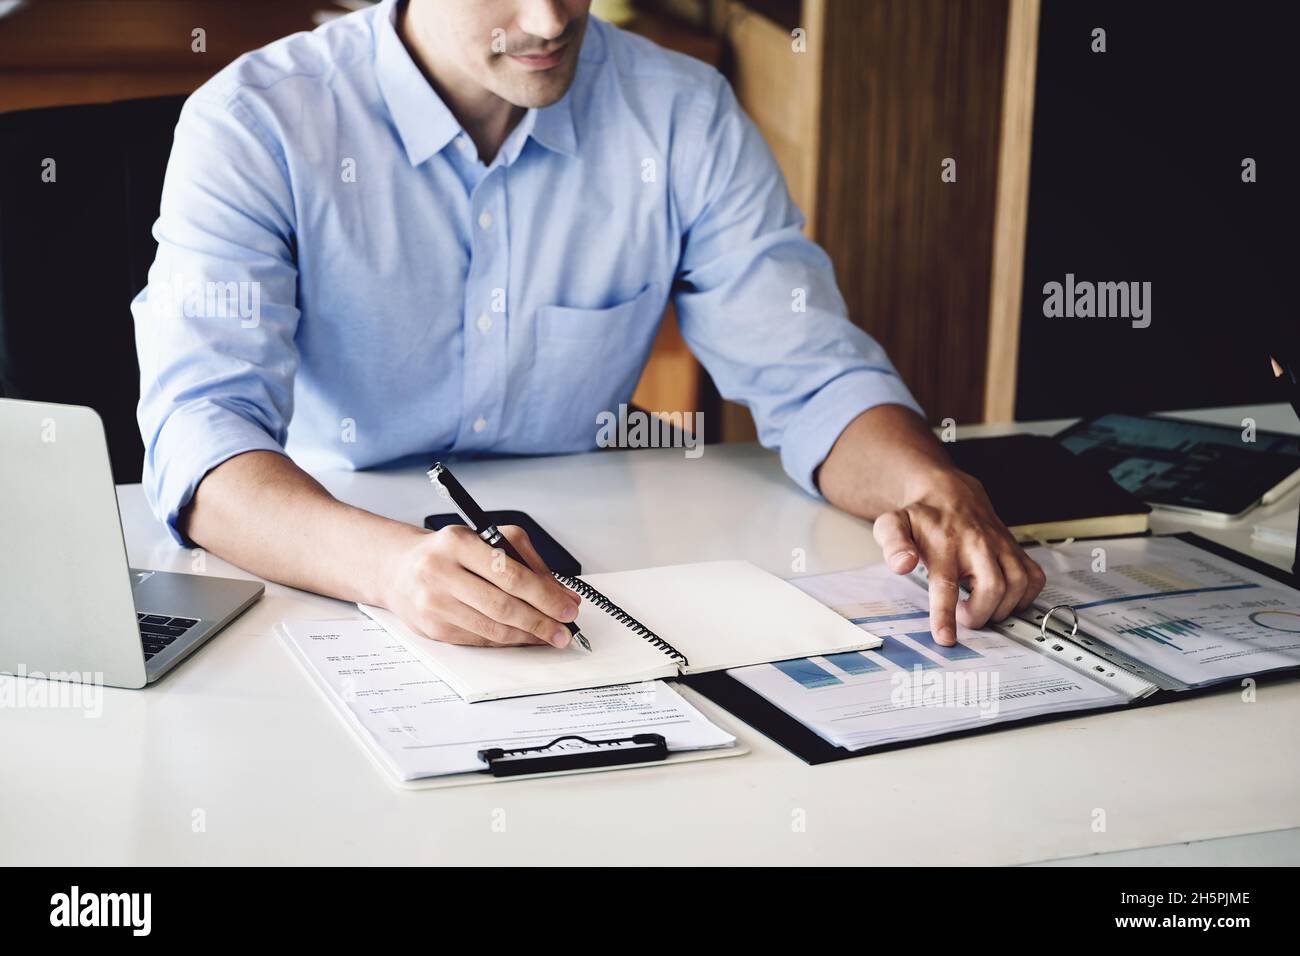 financial budget audit A male auditor is using a pen to write down budgets to trace the company's financial fraud. Stock Photo